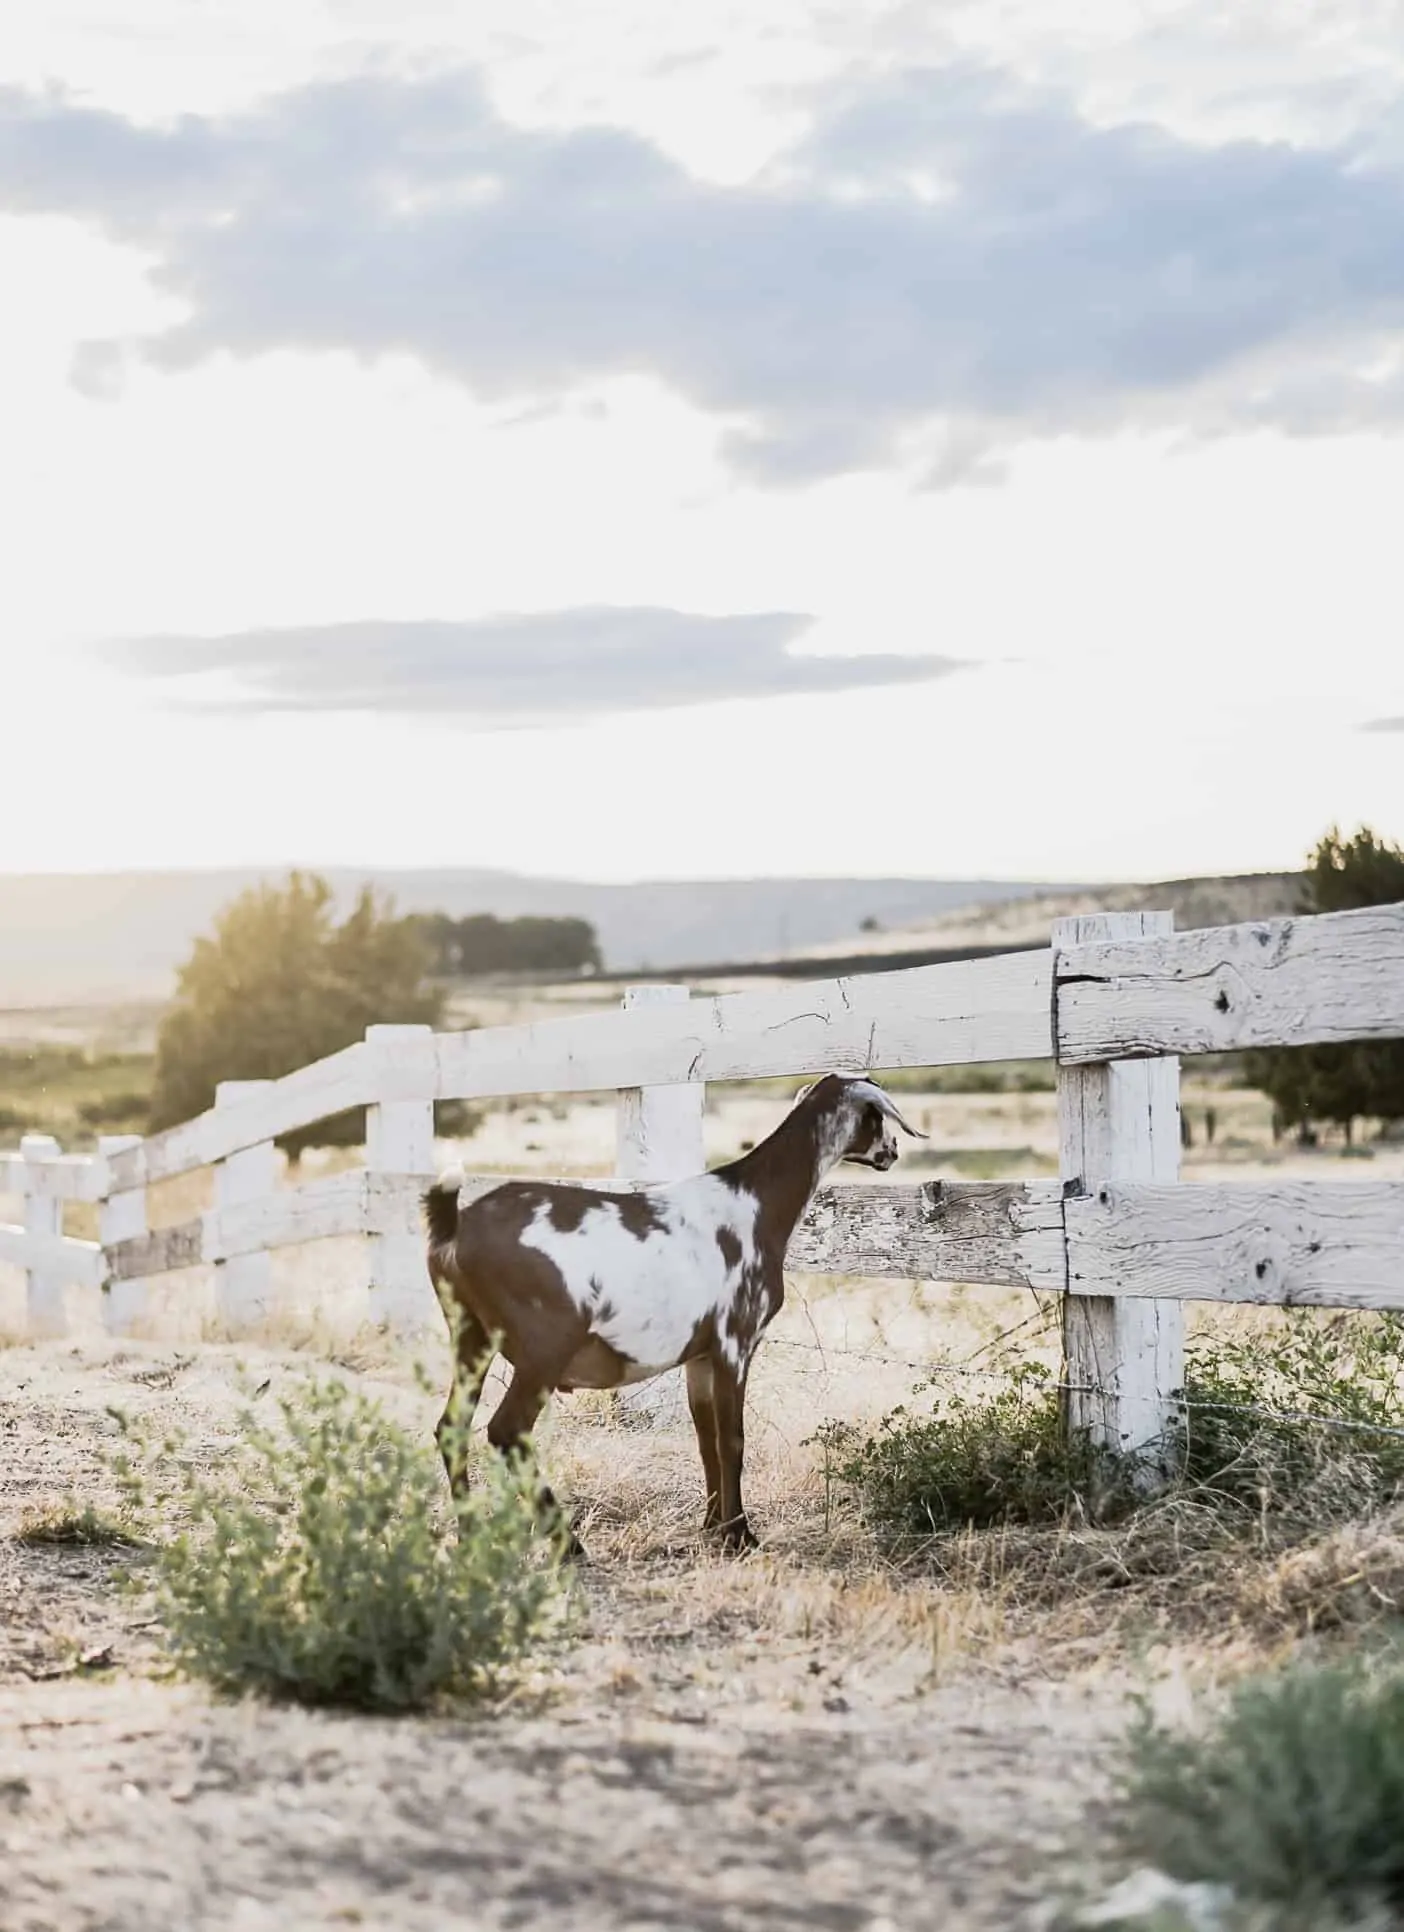 The Best Resources for Goat Care: My two favorite websites for goat health information; full of information for raising goats as pets as well as for income. #goatcare #goatresources #goats